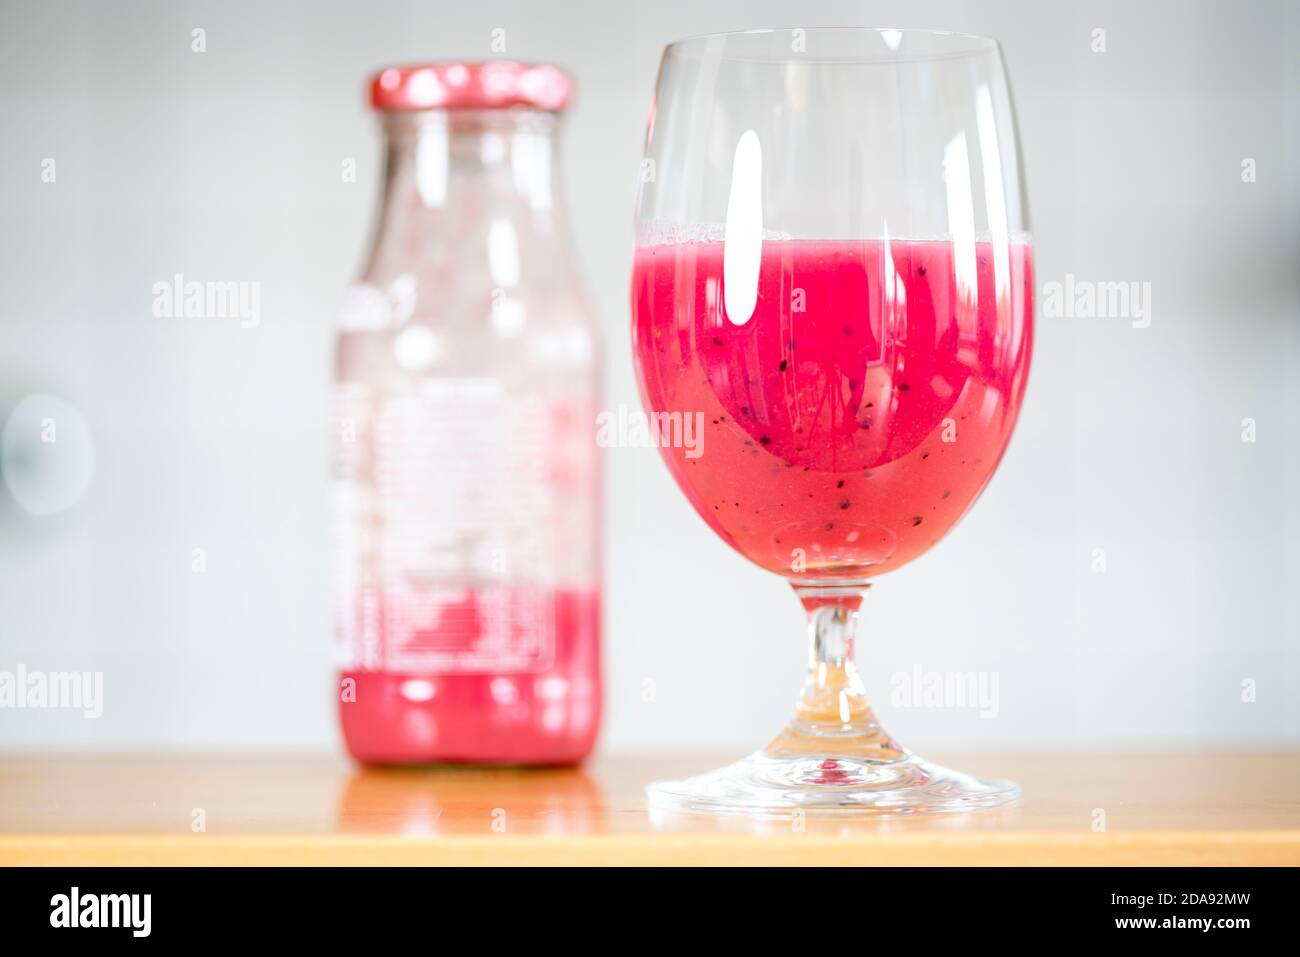 Smoothies, puree juice of various fruits, Stock Photo